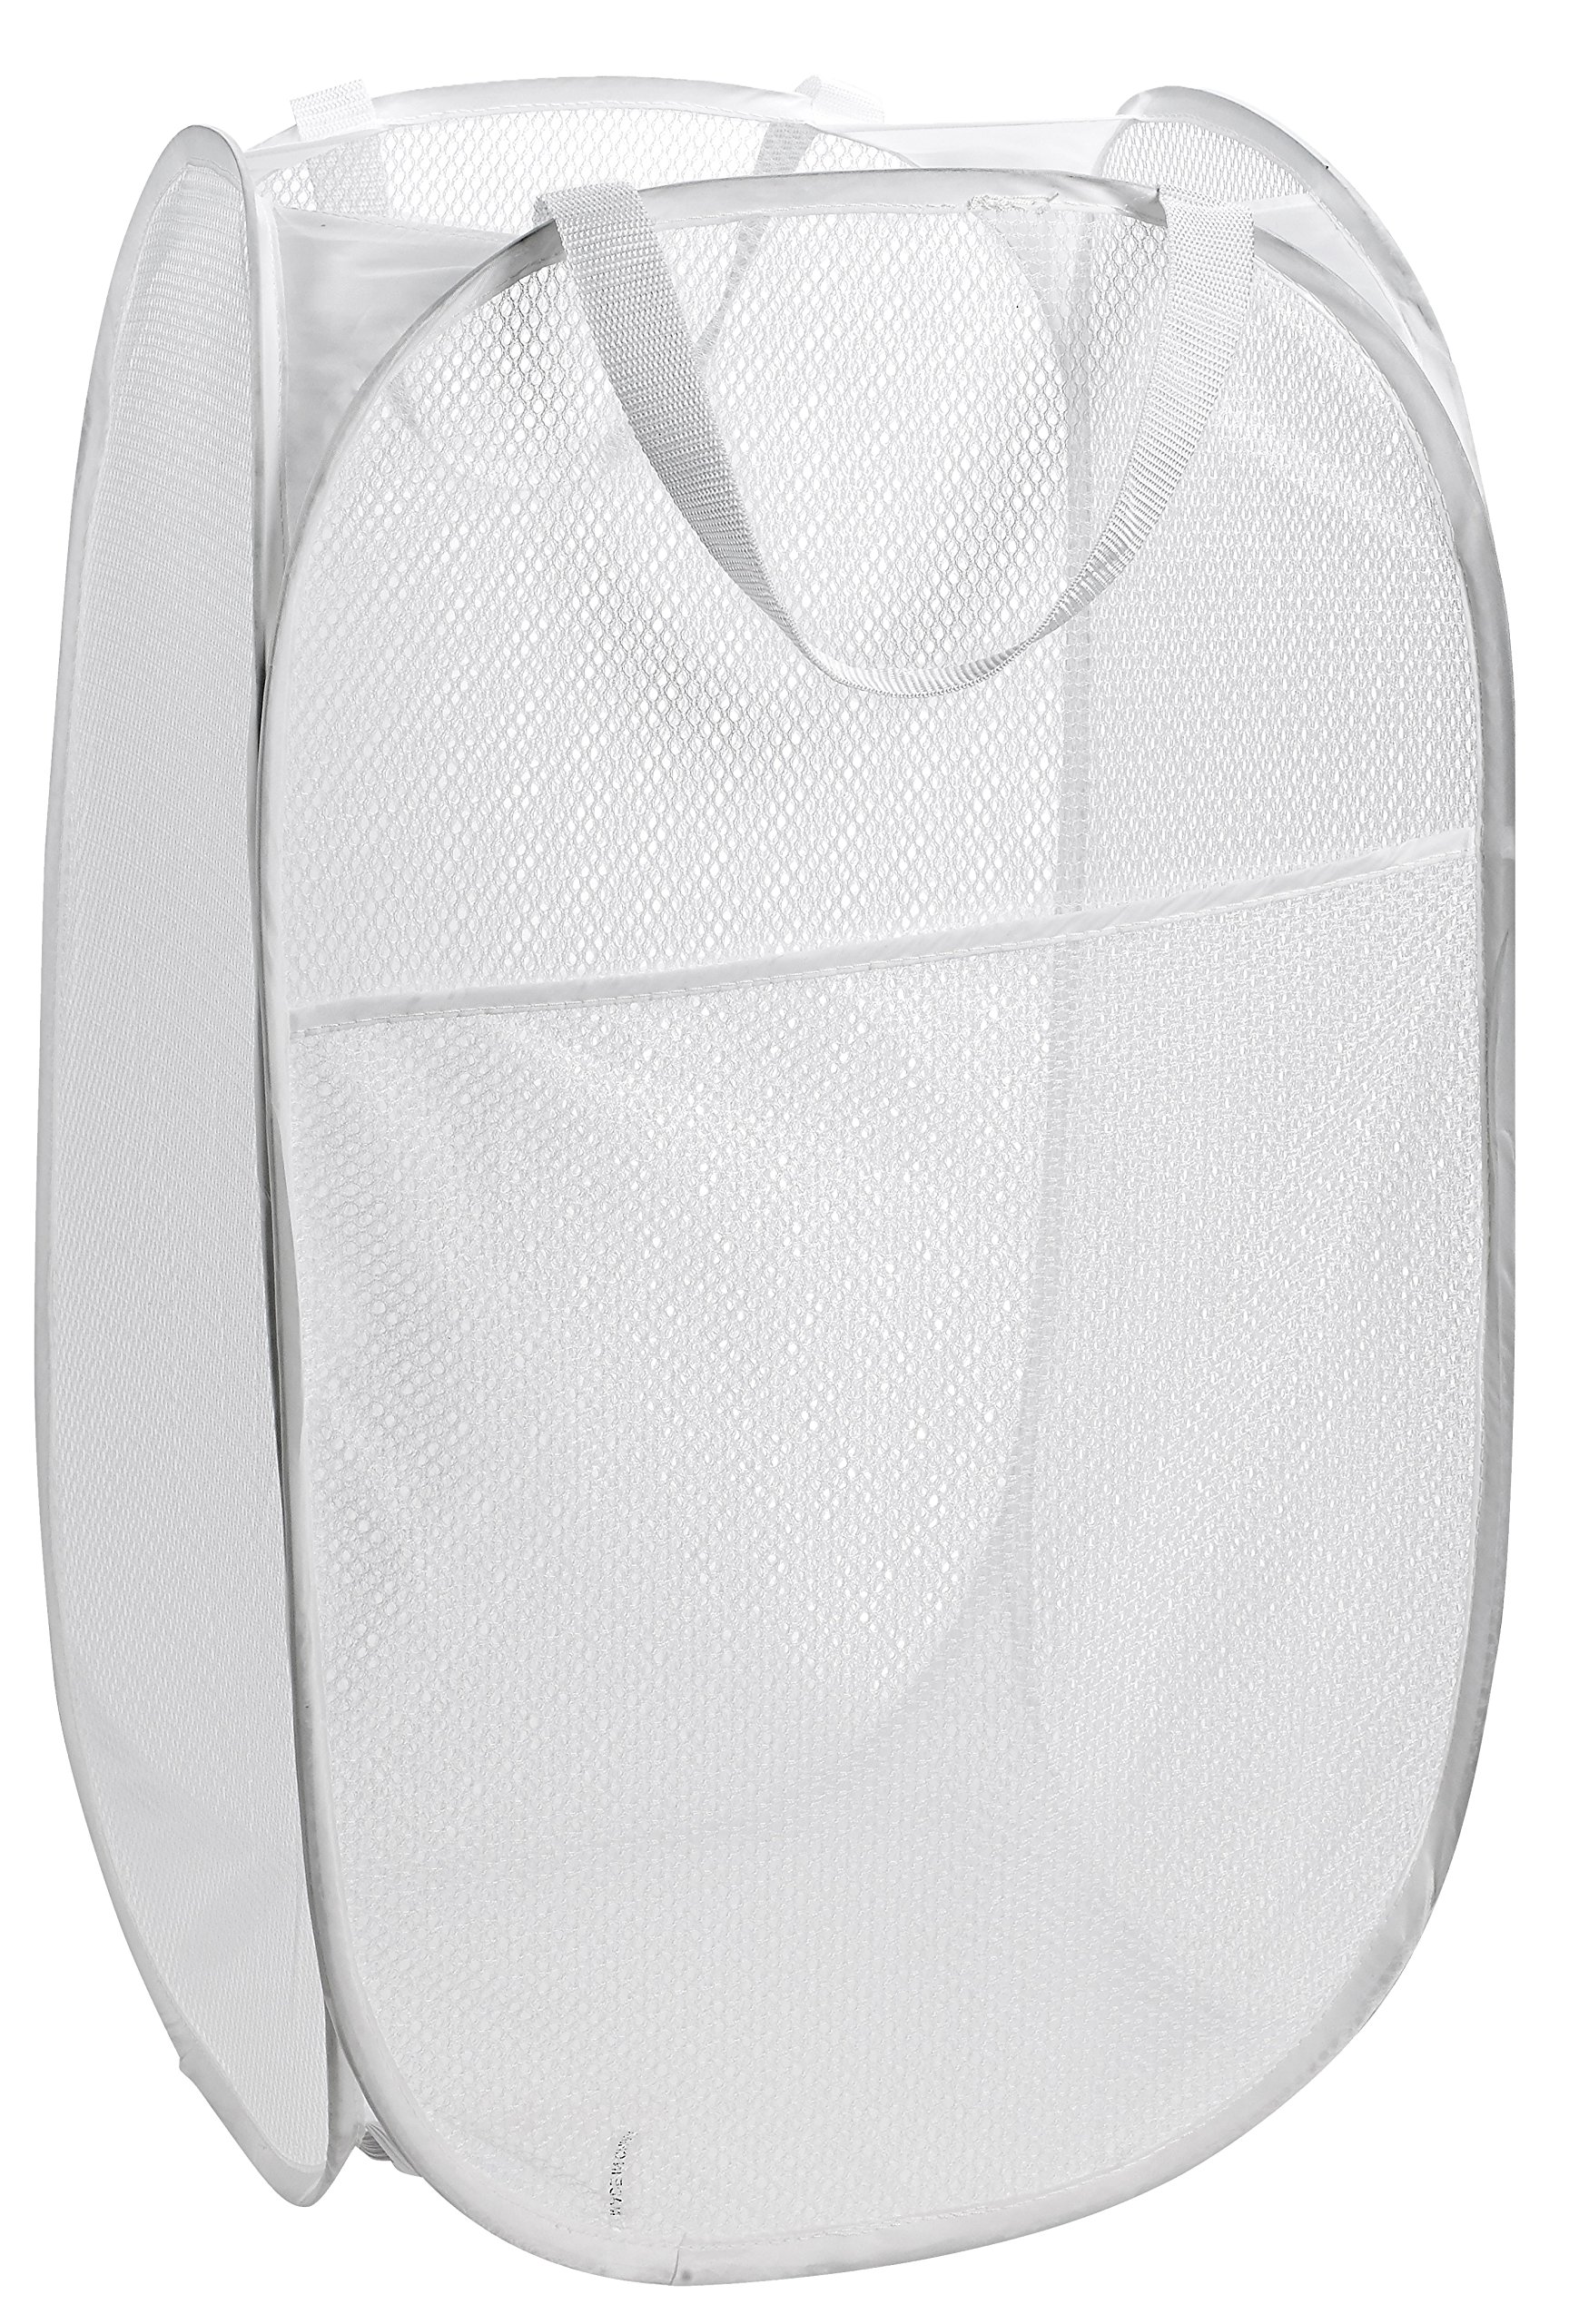 Book Cover Handy Laundry Mesh Popup Hamper – Foldable Lightweight Basket for Washing – Durable Clothing Storage for Kids Room, Students College Dorm, Home, Travel & Camping – White Pop-up Clothes Hamper